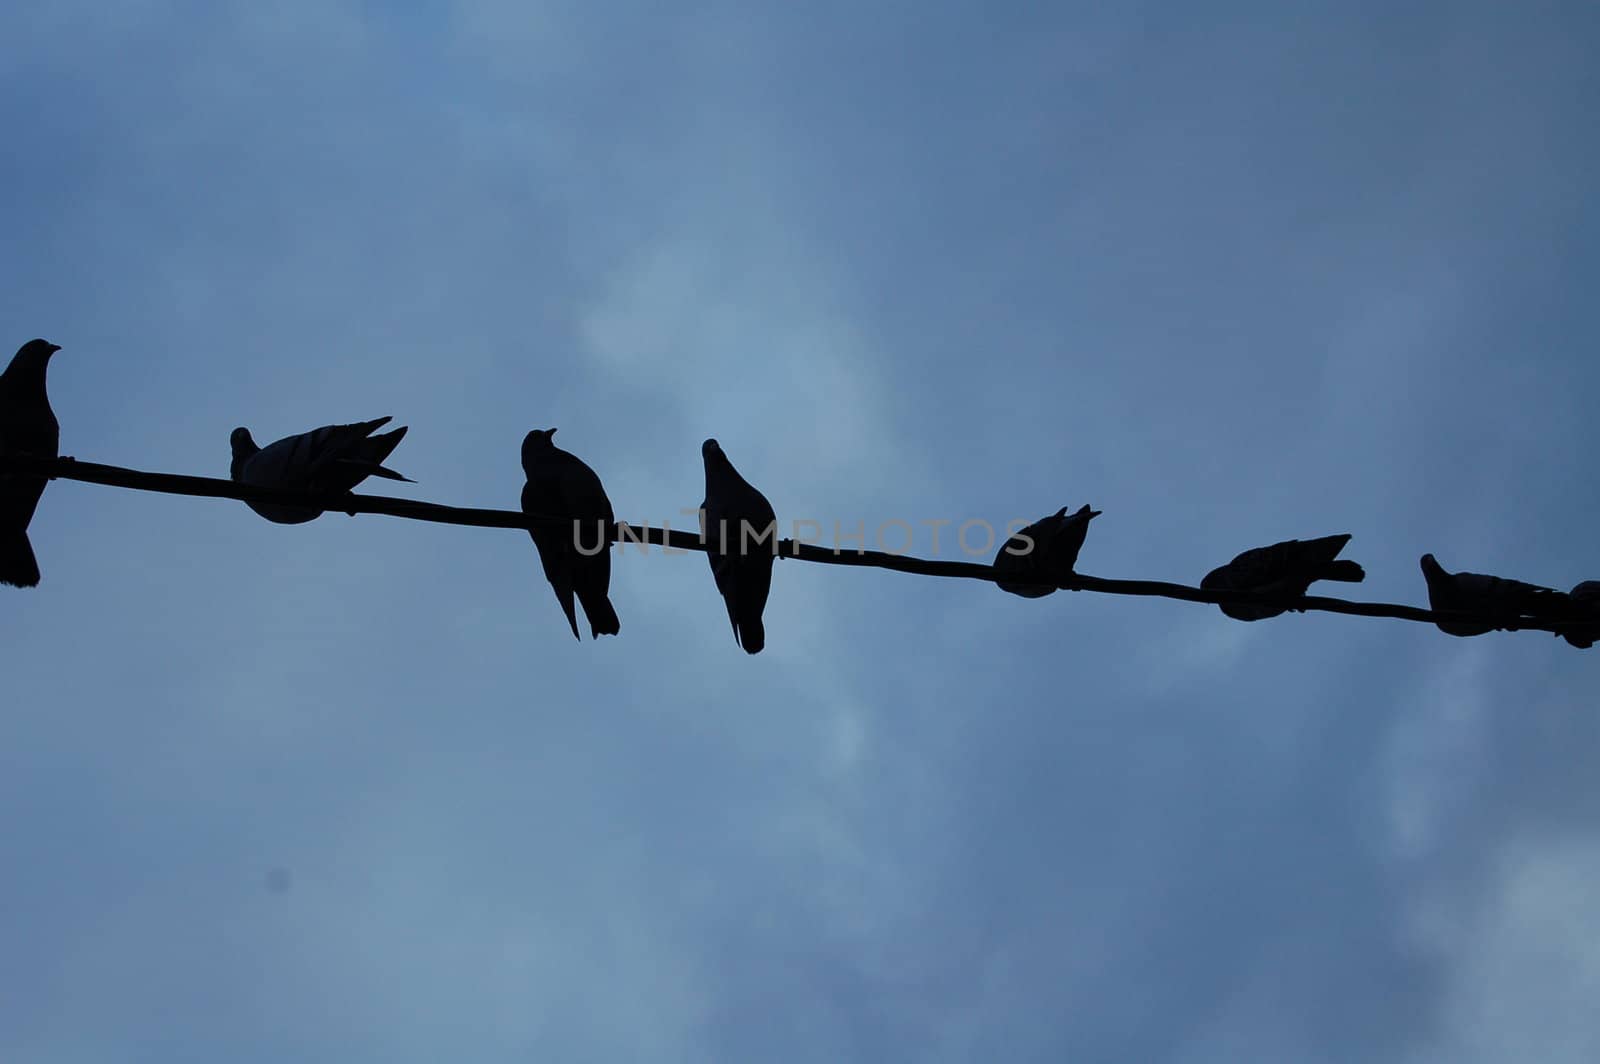 doves on a wire2